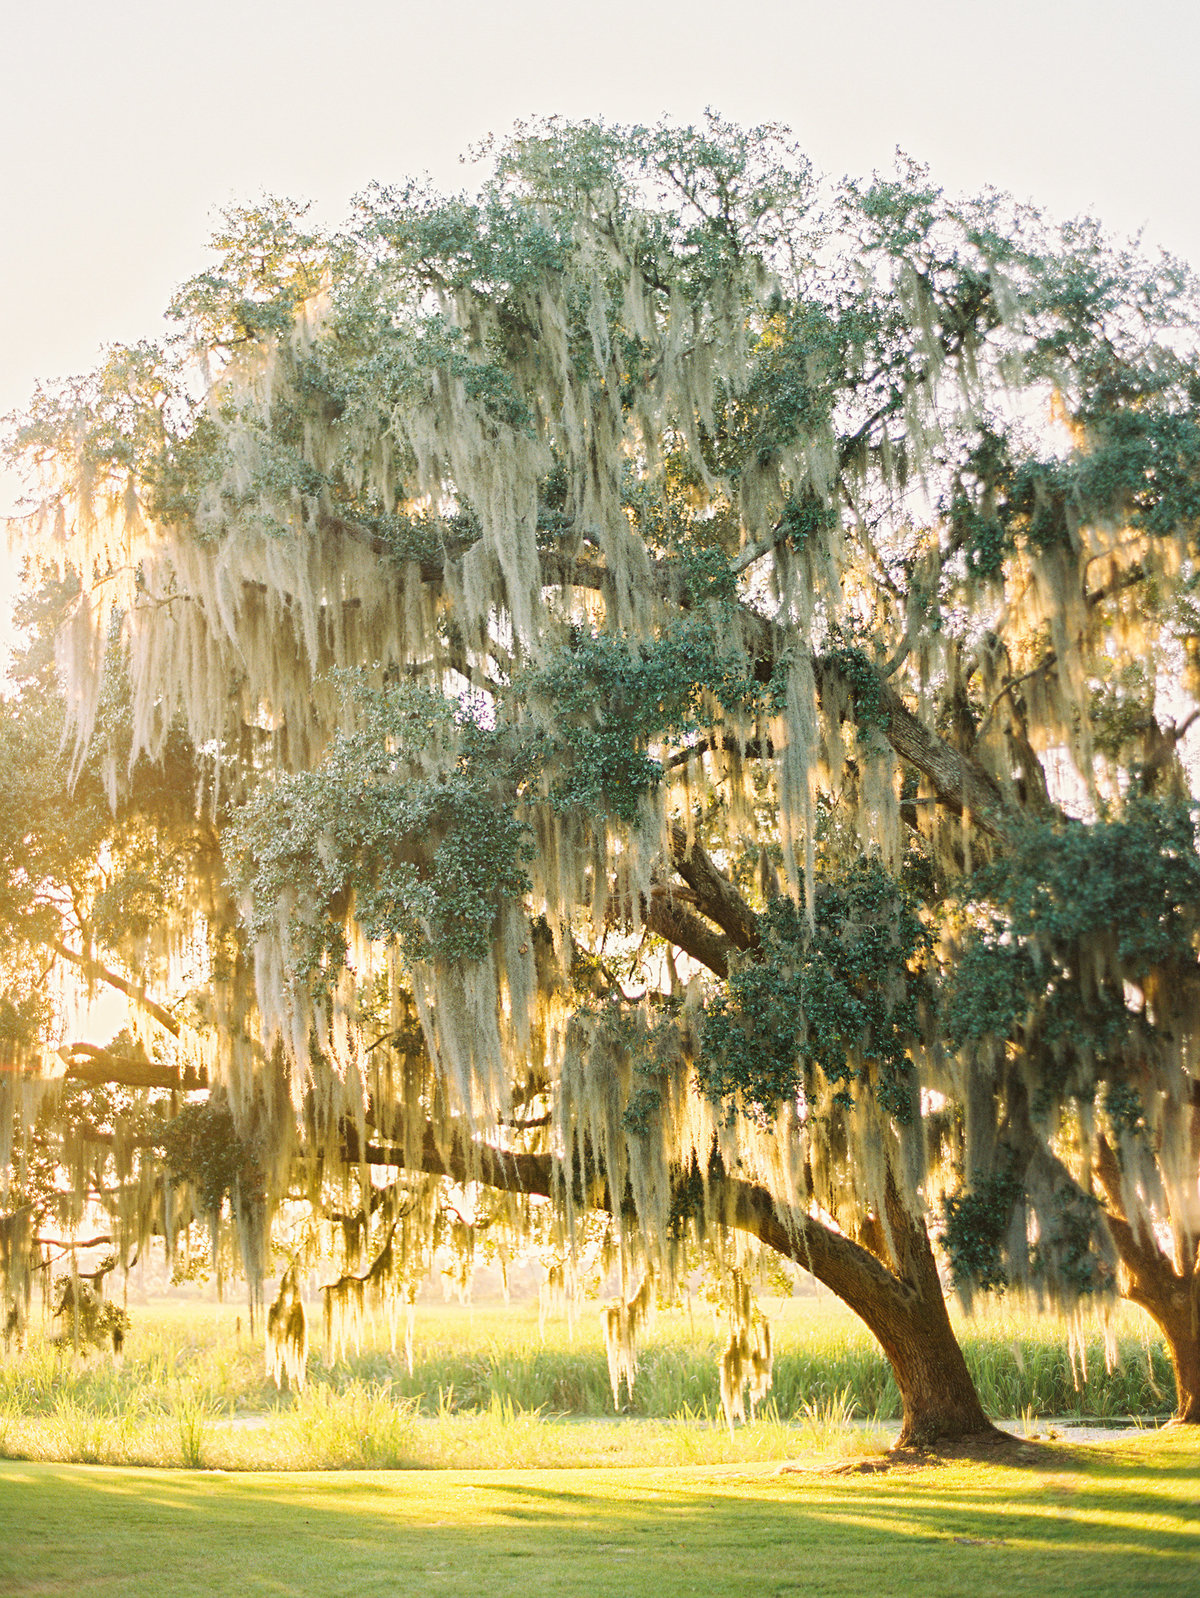 Giant oak tree with spanish moss at sunset.